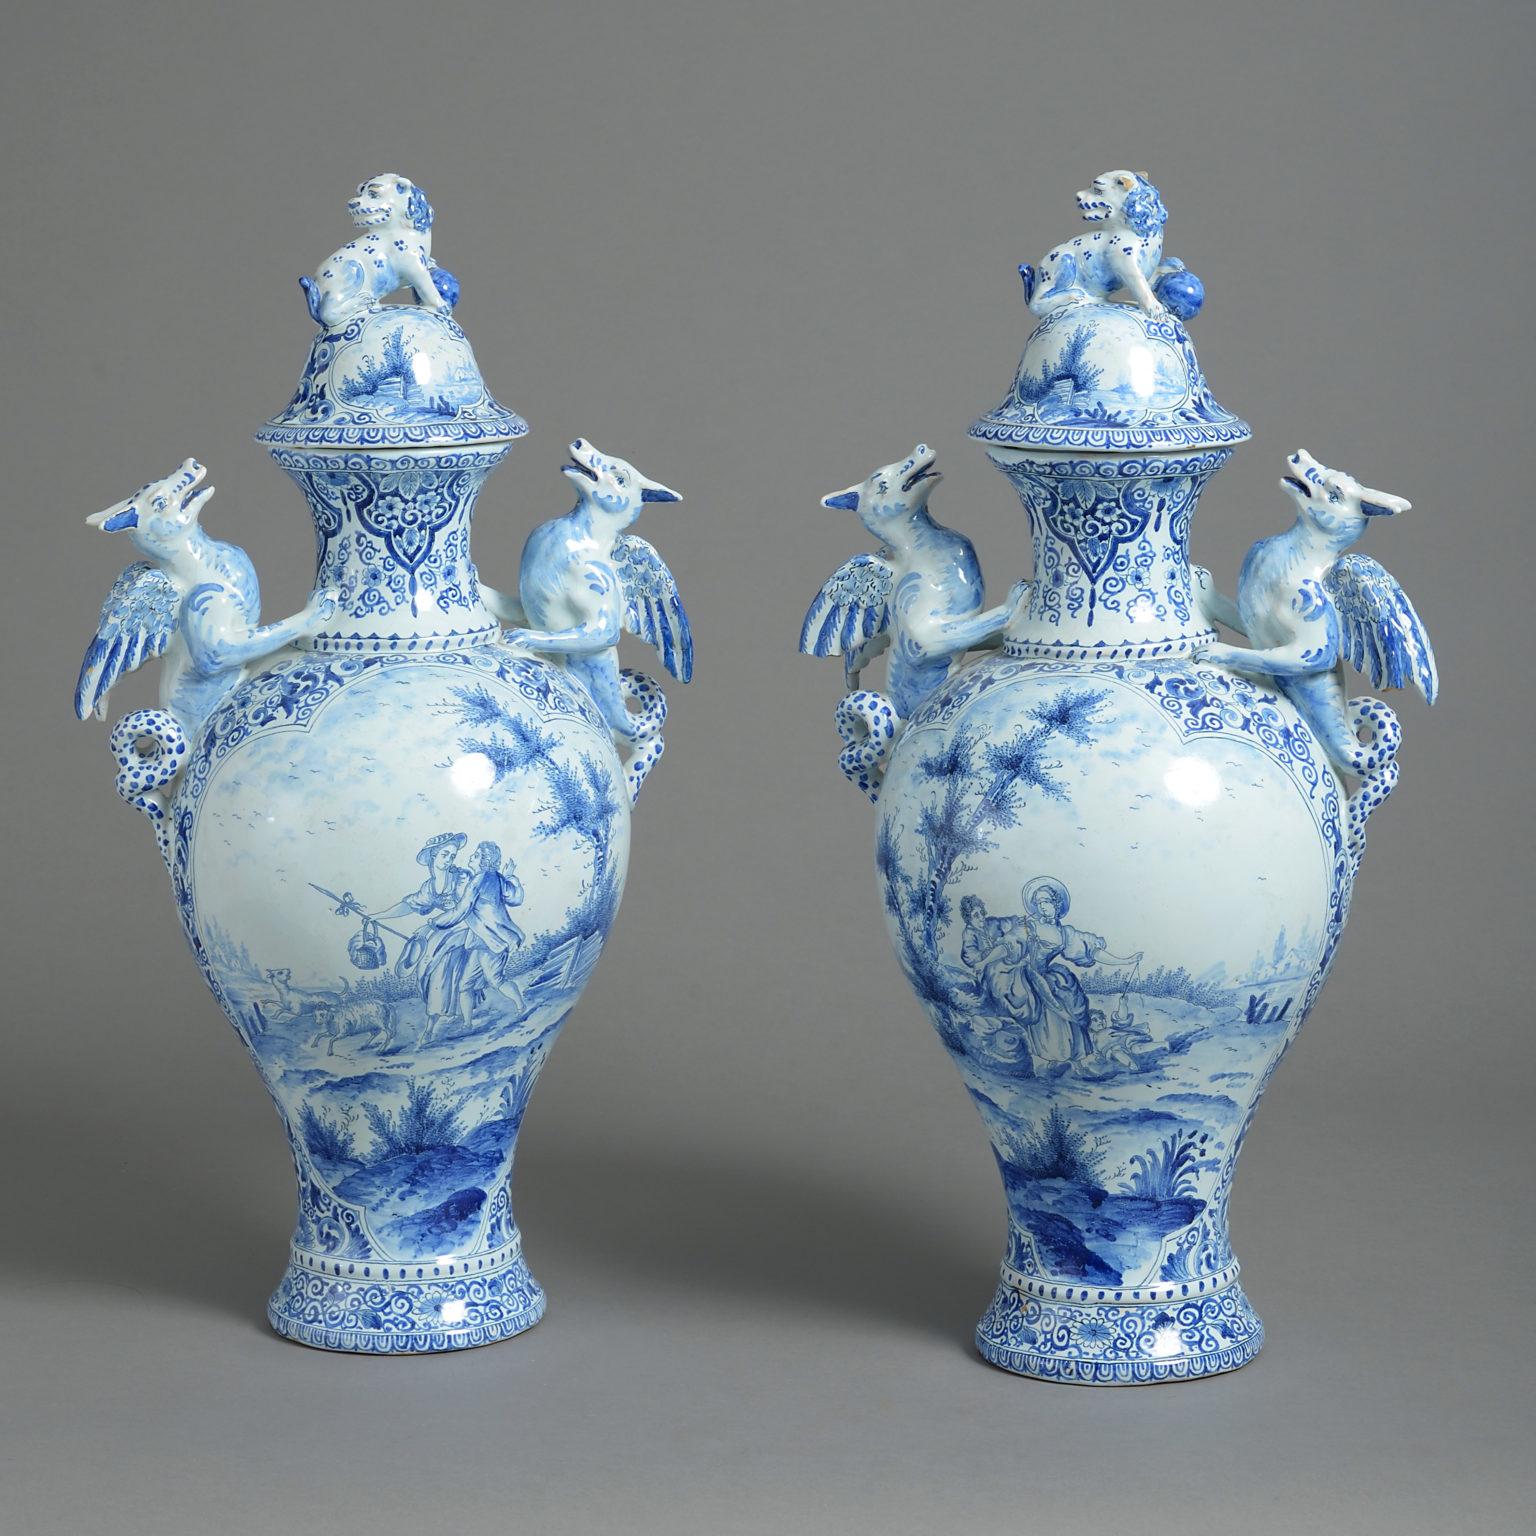 A large early 20th century pair of blue and white glazed Delft pottery vases and covers, the lids surmounted with leopards and set upon bodies of baluster form, with dragon handles, all decorated with cartouches containing landscapes and figurative